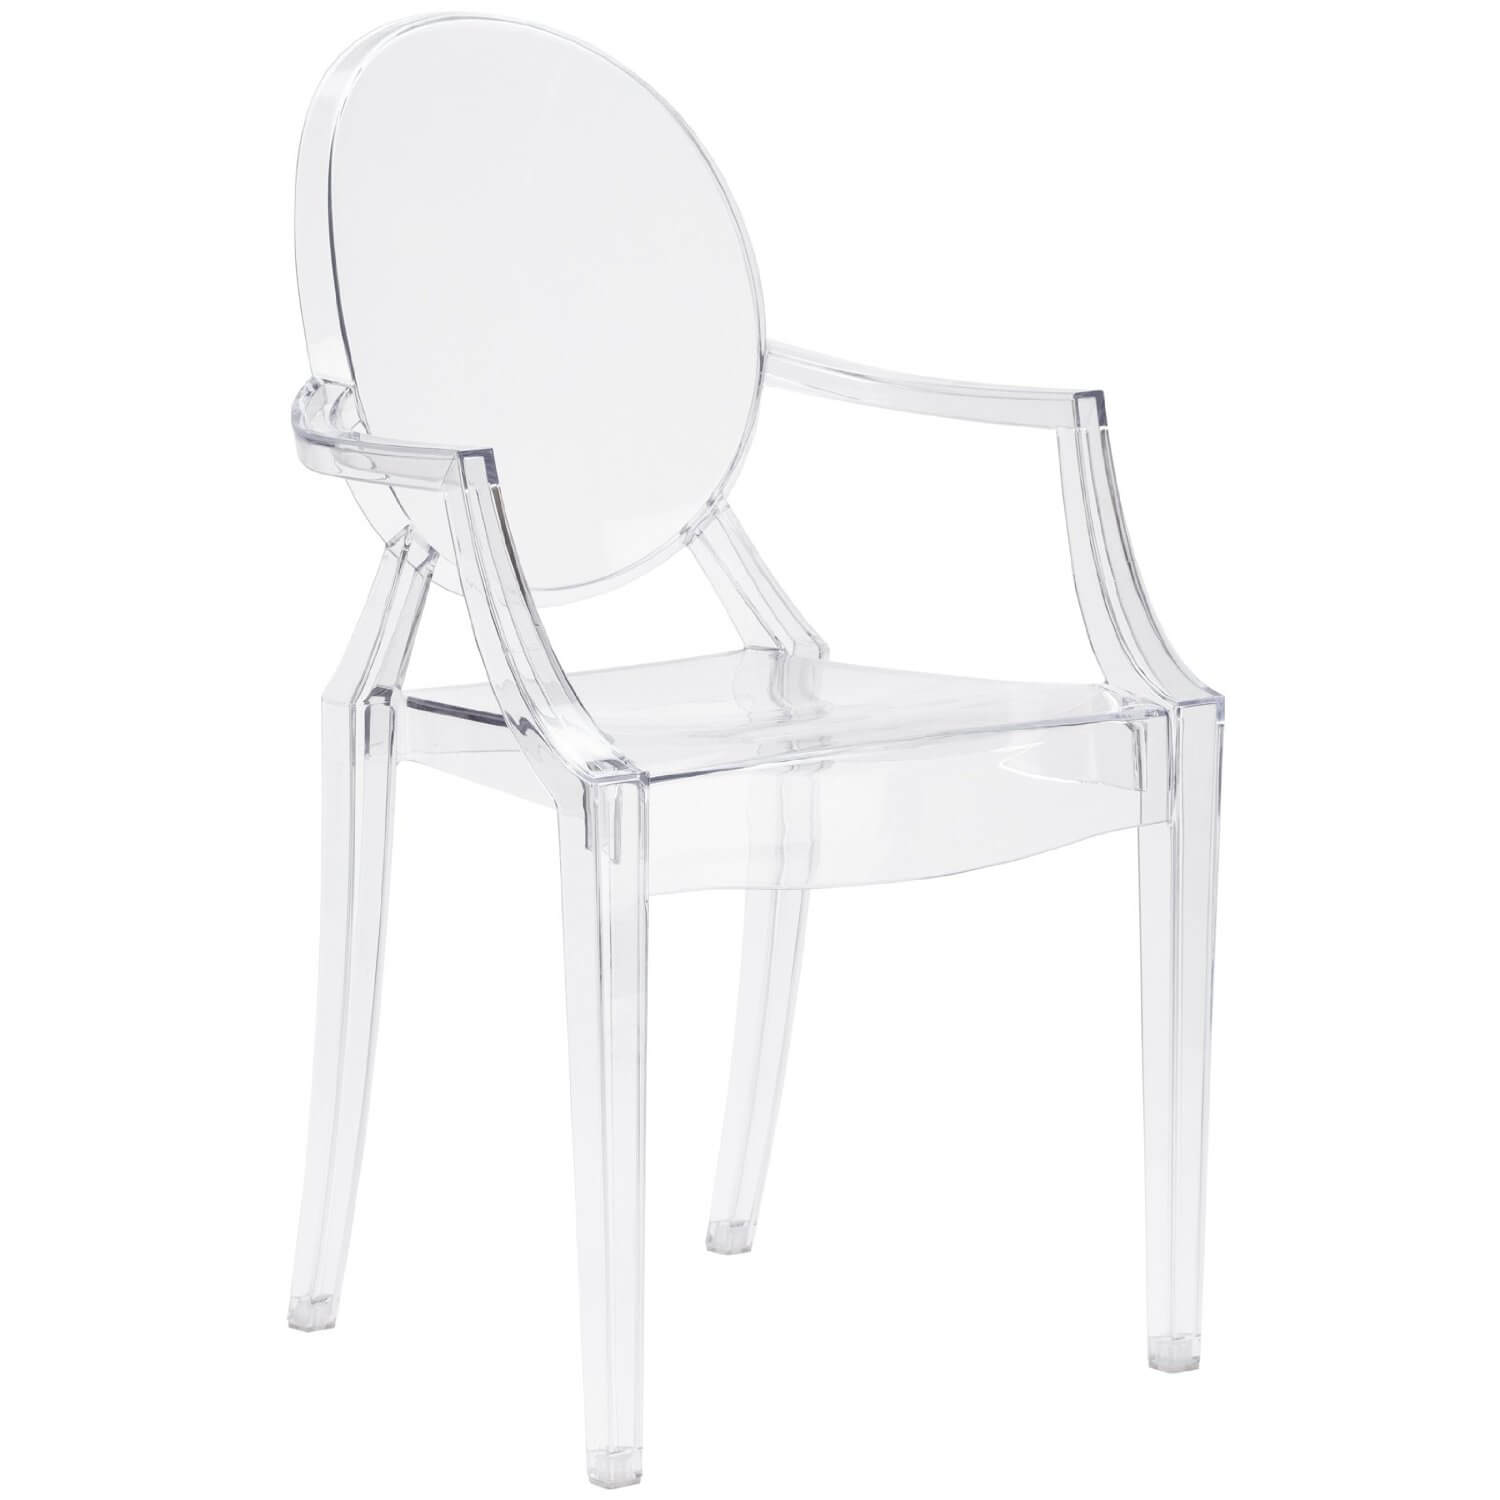 The Best Dining Room Chairs under 100$ - Reviews [2022]